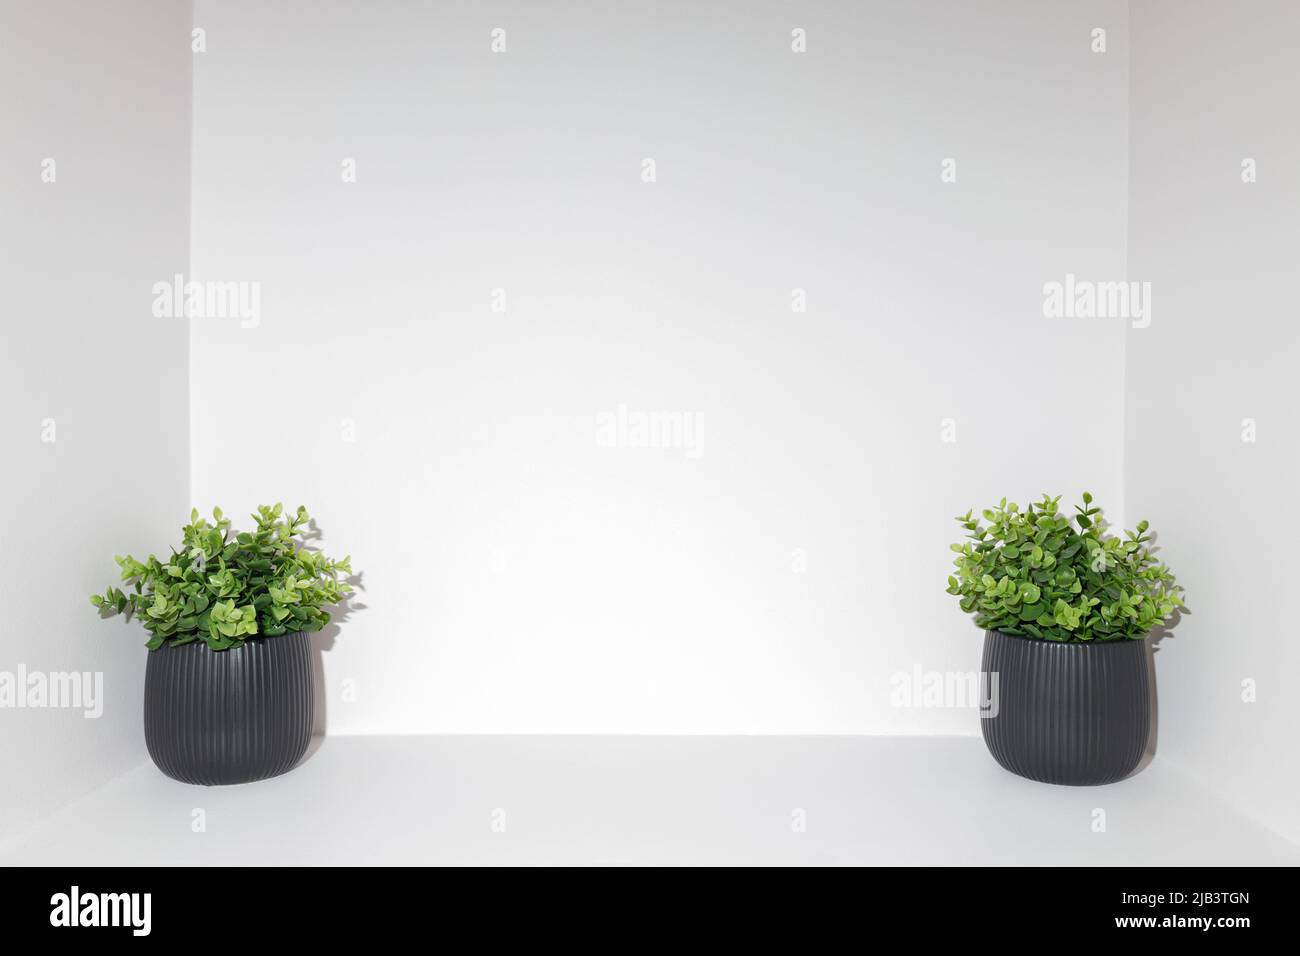 Two black pots with plants on a white background with negative space for text Stock Photo